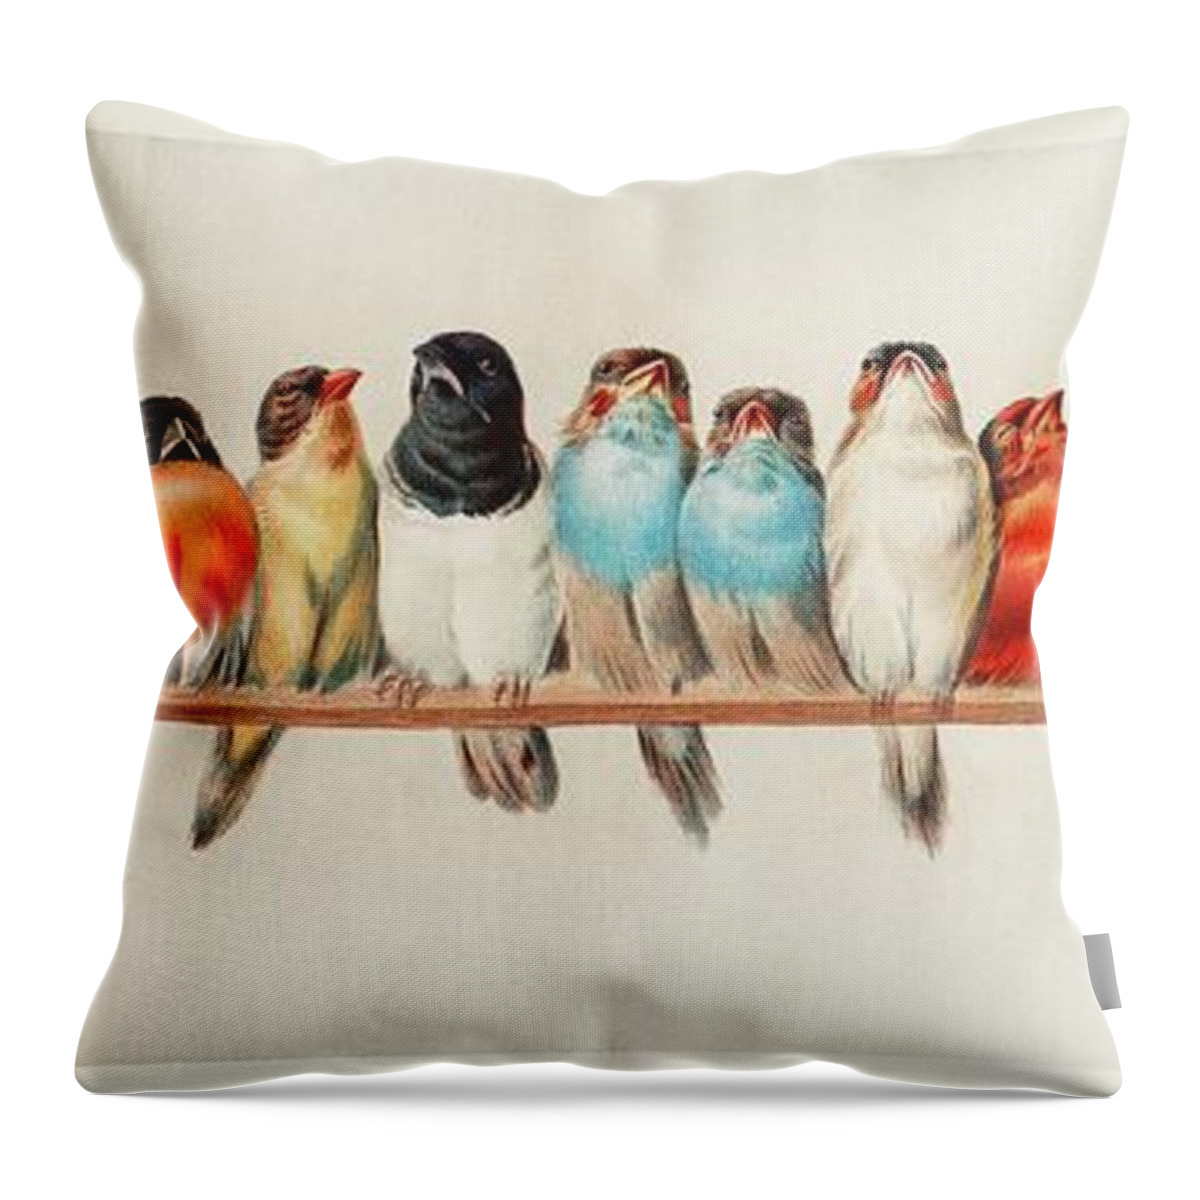 Wooden Throw Pillow featuring the painting A Perch of Birds, 1880 by Vincent Monozlay